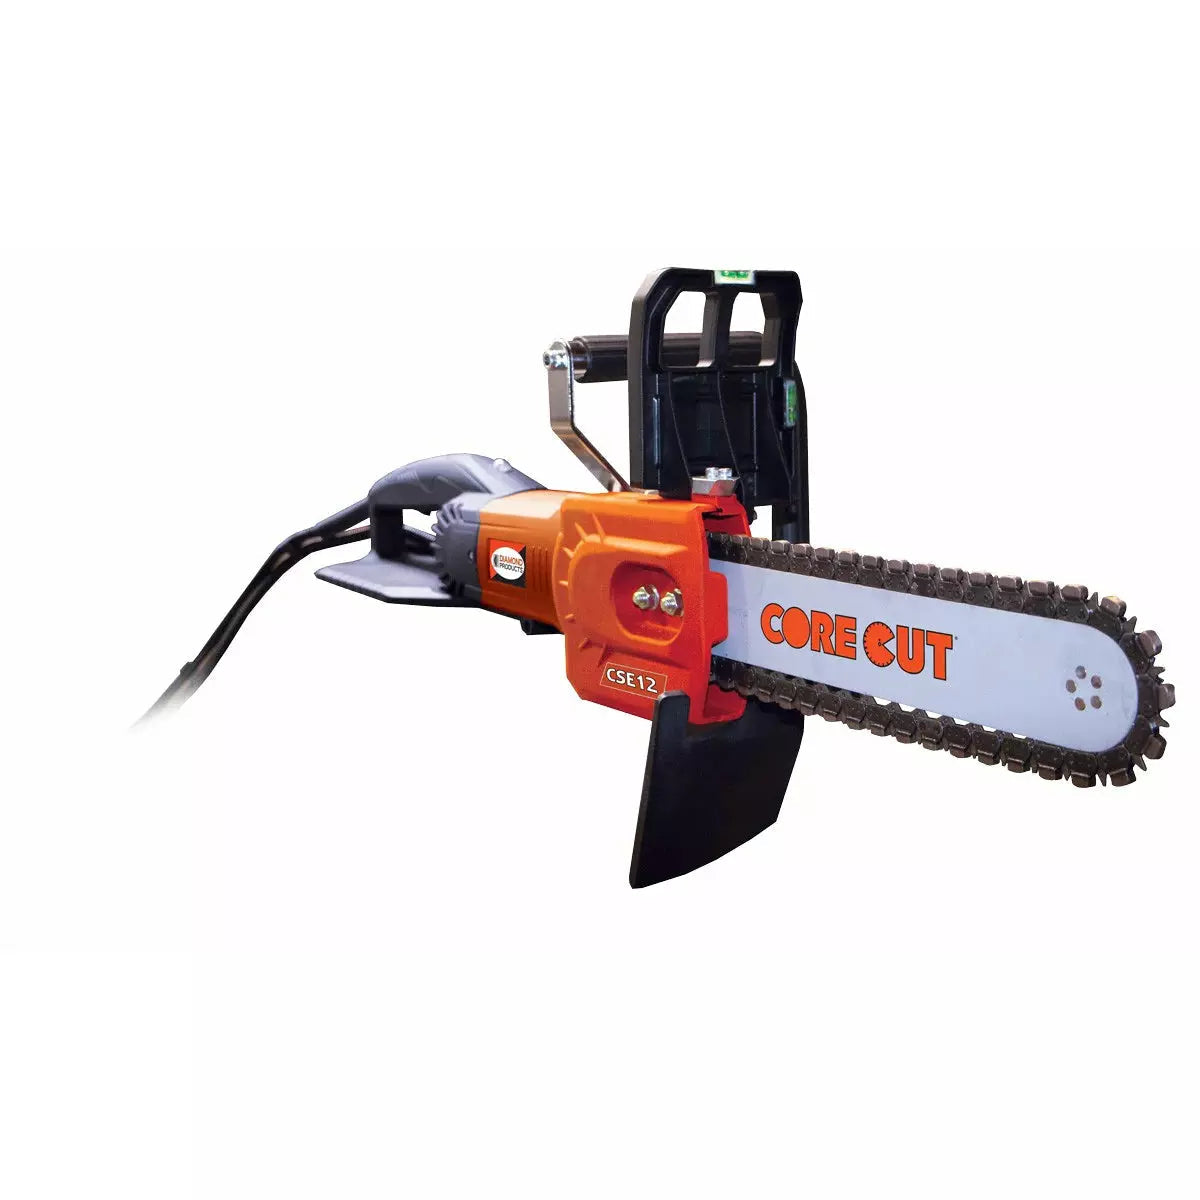 CSE12 ELECTRIC CHAIN SAW PACKAGE CORE CUT